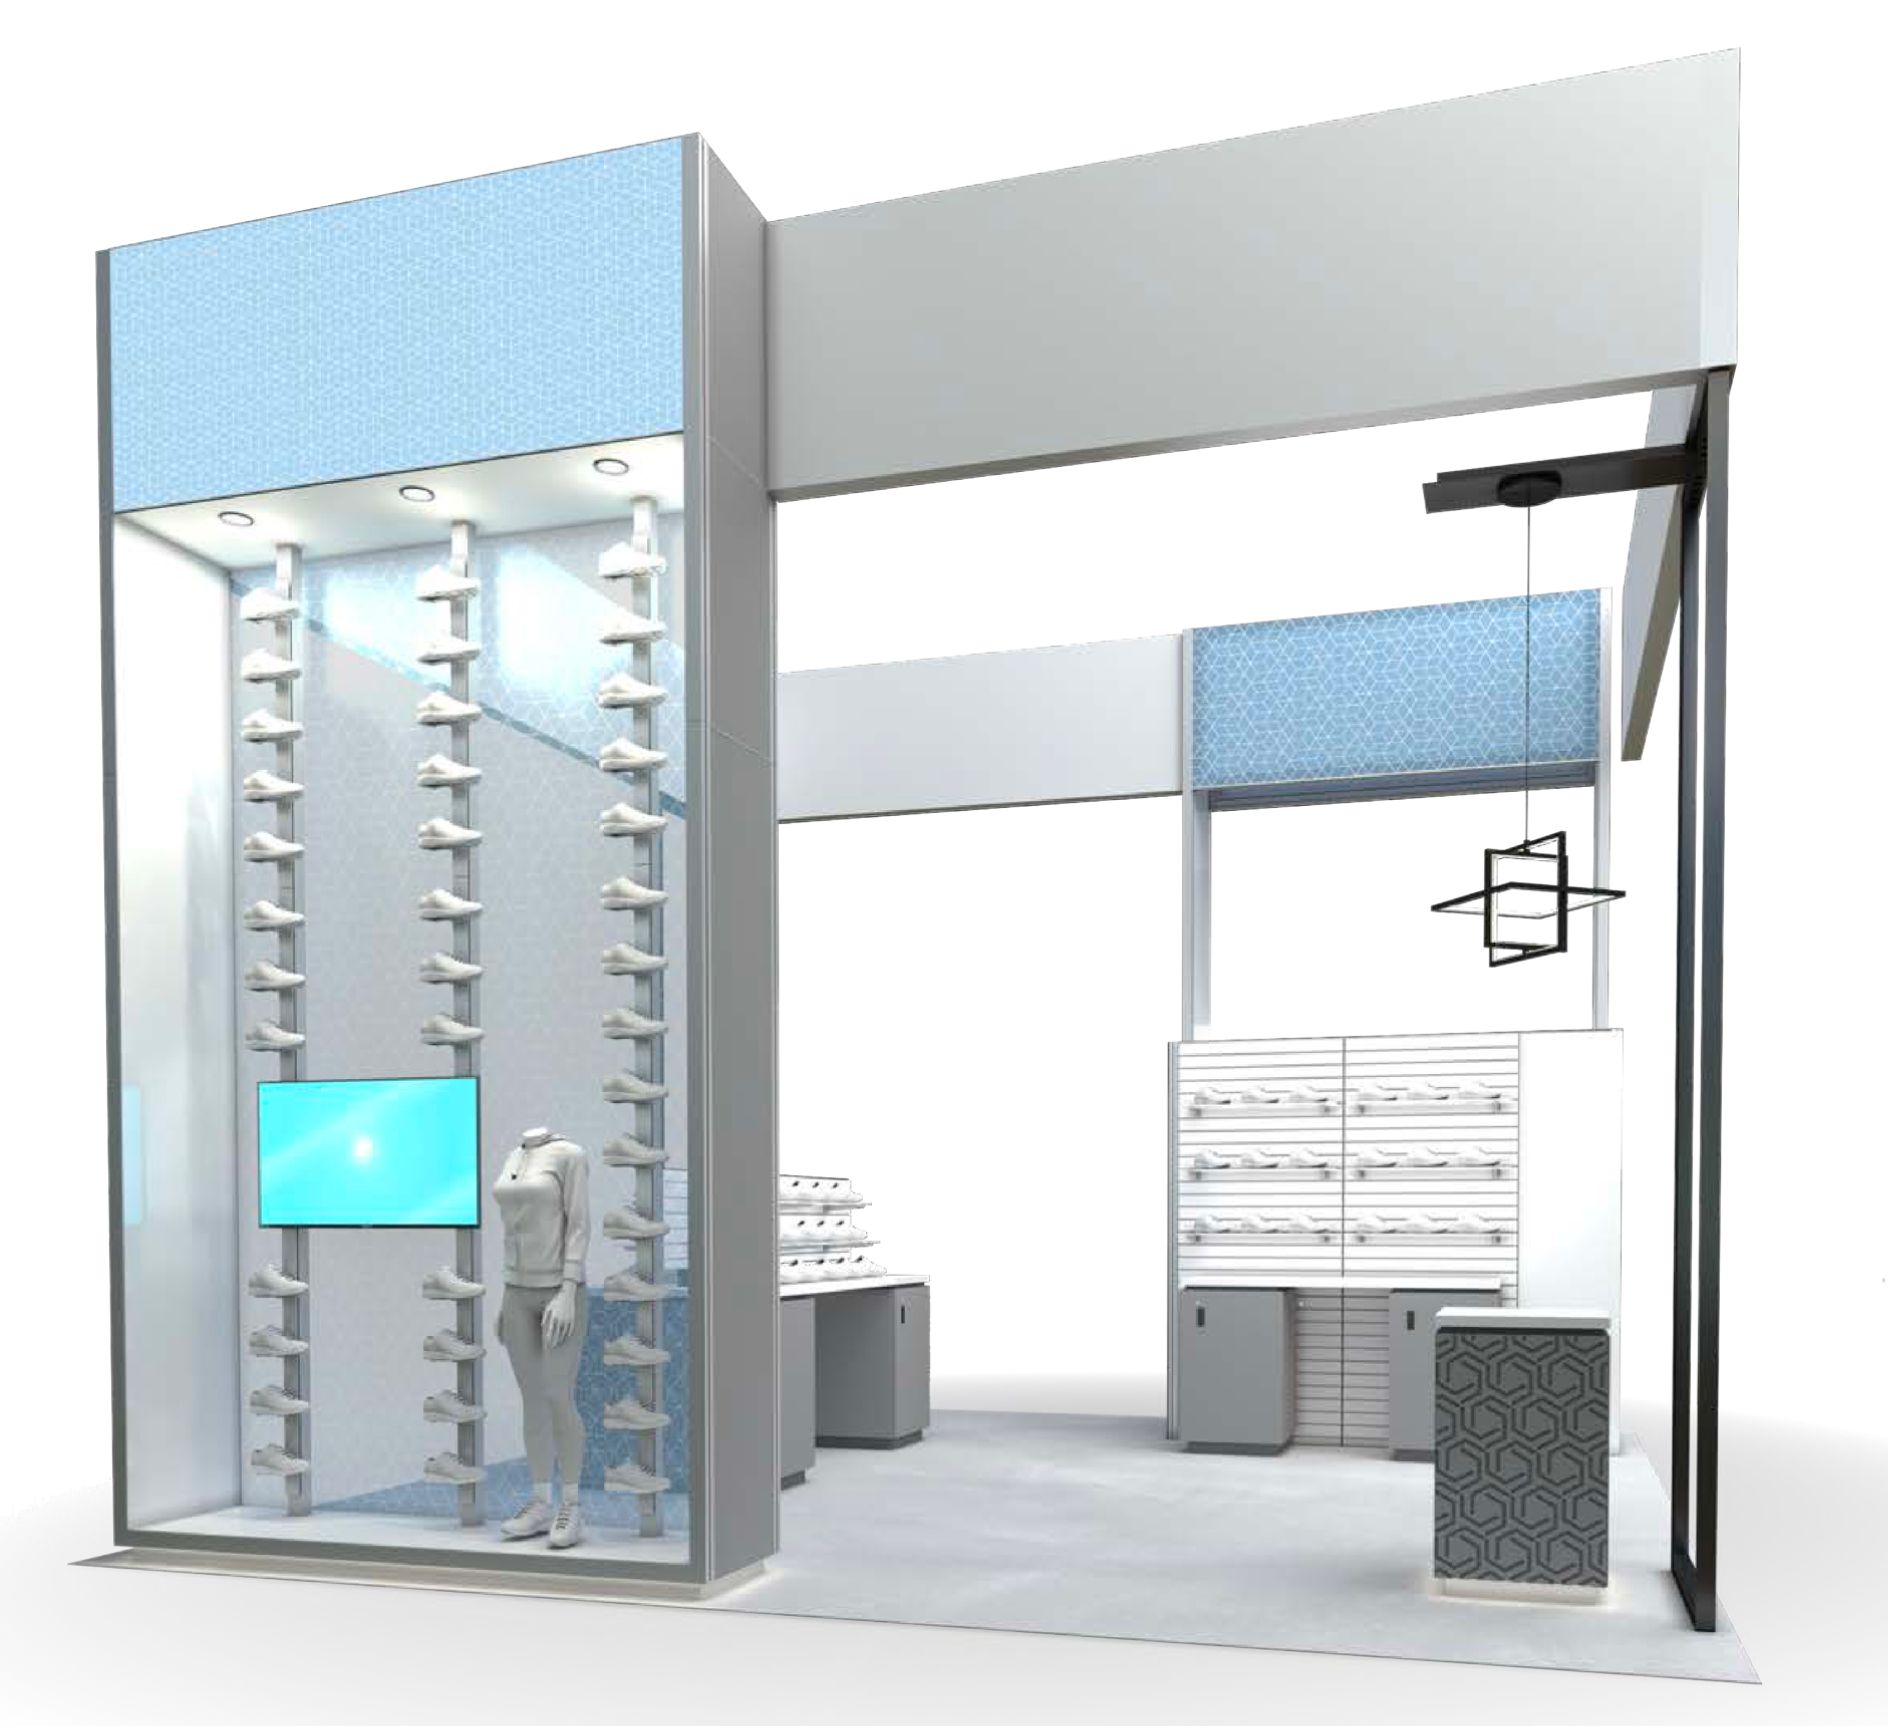 Trade Show Booth with Product Displays